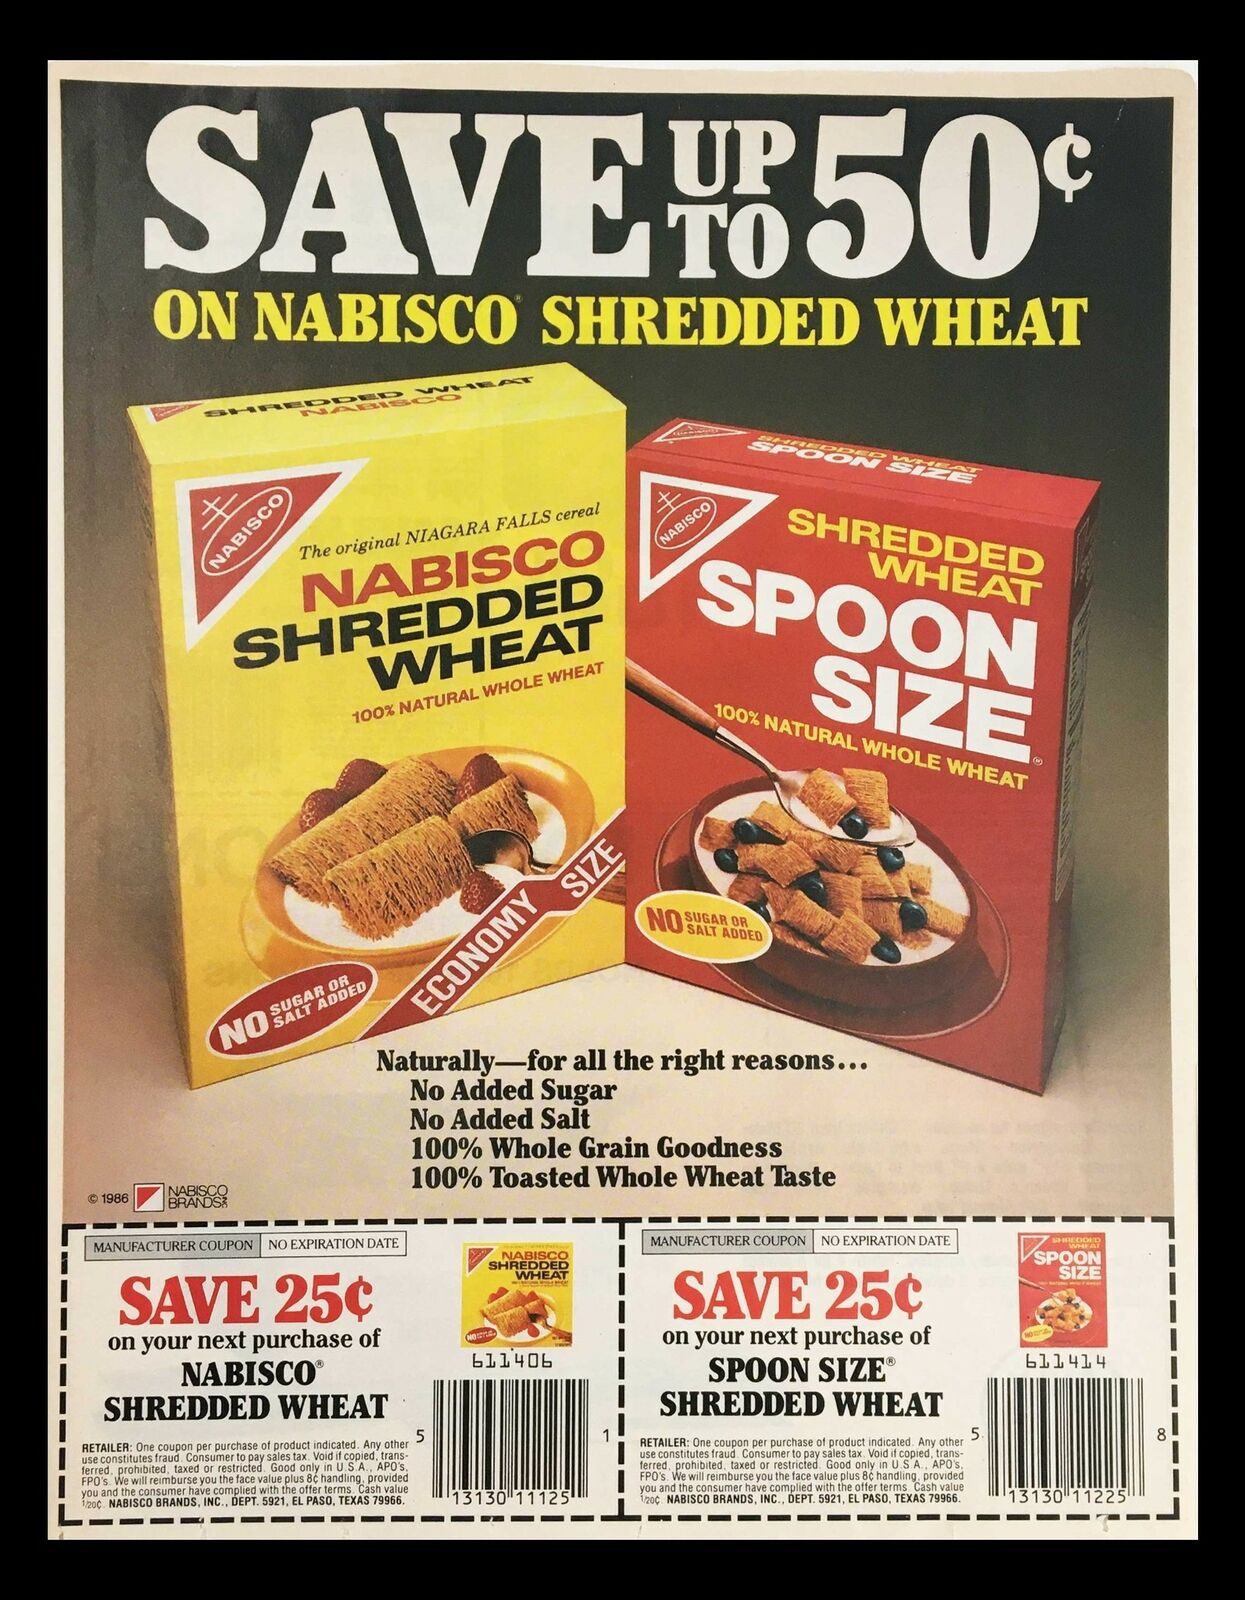 1986 Nabisco Shredded Wheat & Spoon Size Cereal Circular Coupon Advertisement